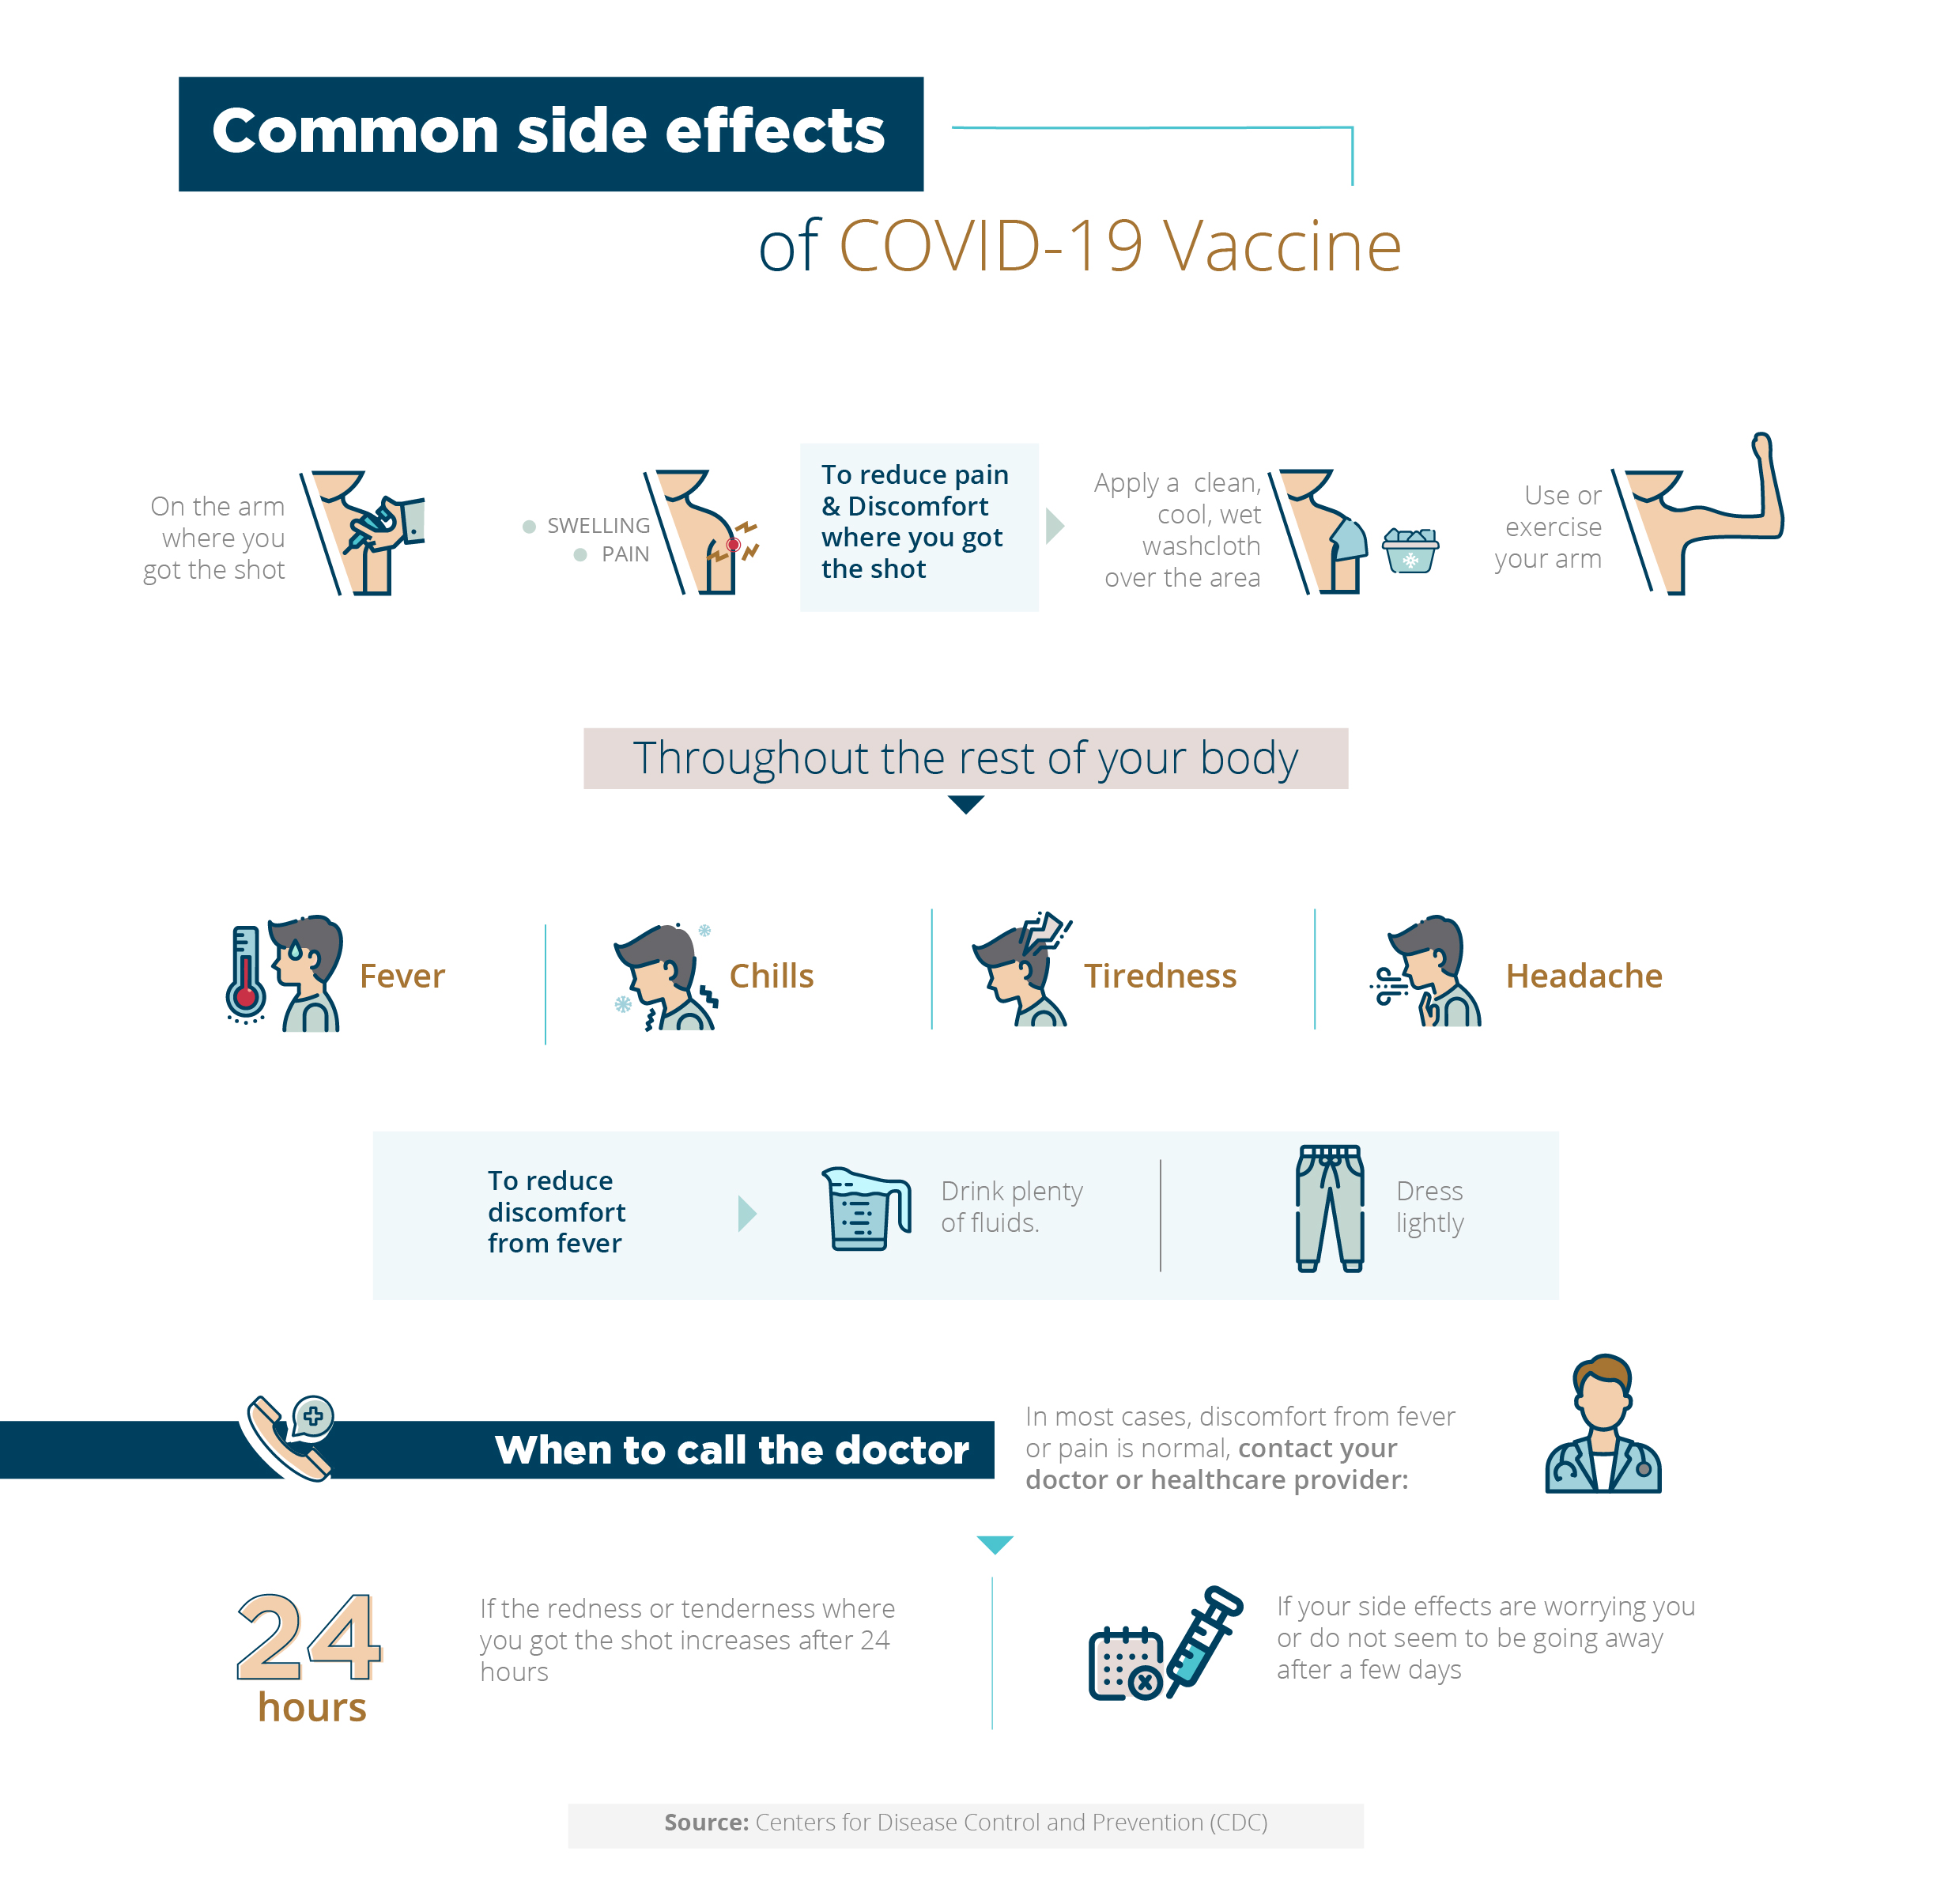 Common side effects of COVID-19 vaccine